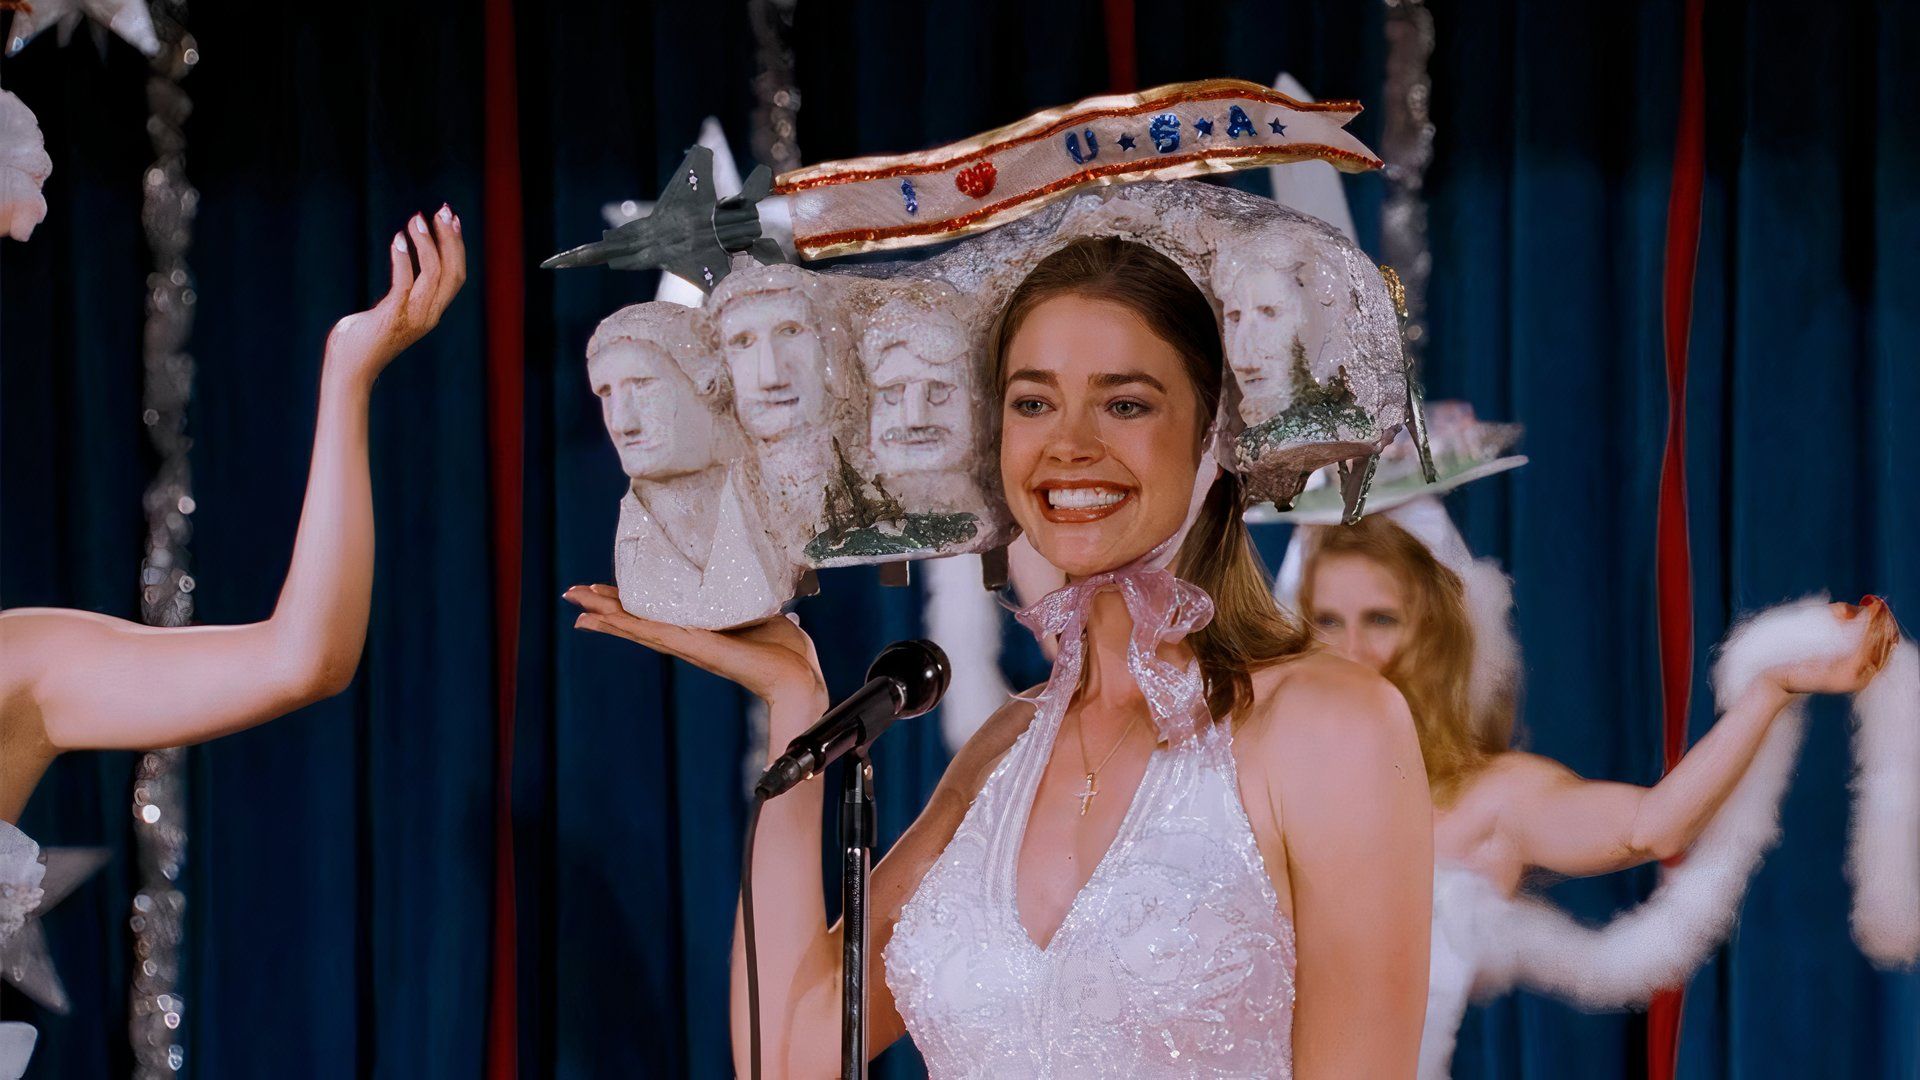 Denise Richards wearing a Mount Rushmore hat in Drop Dead Gorgeous